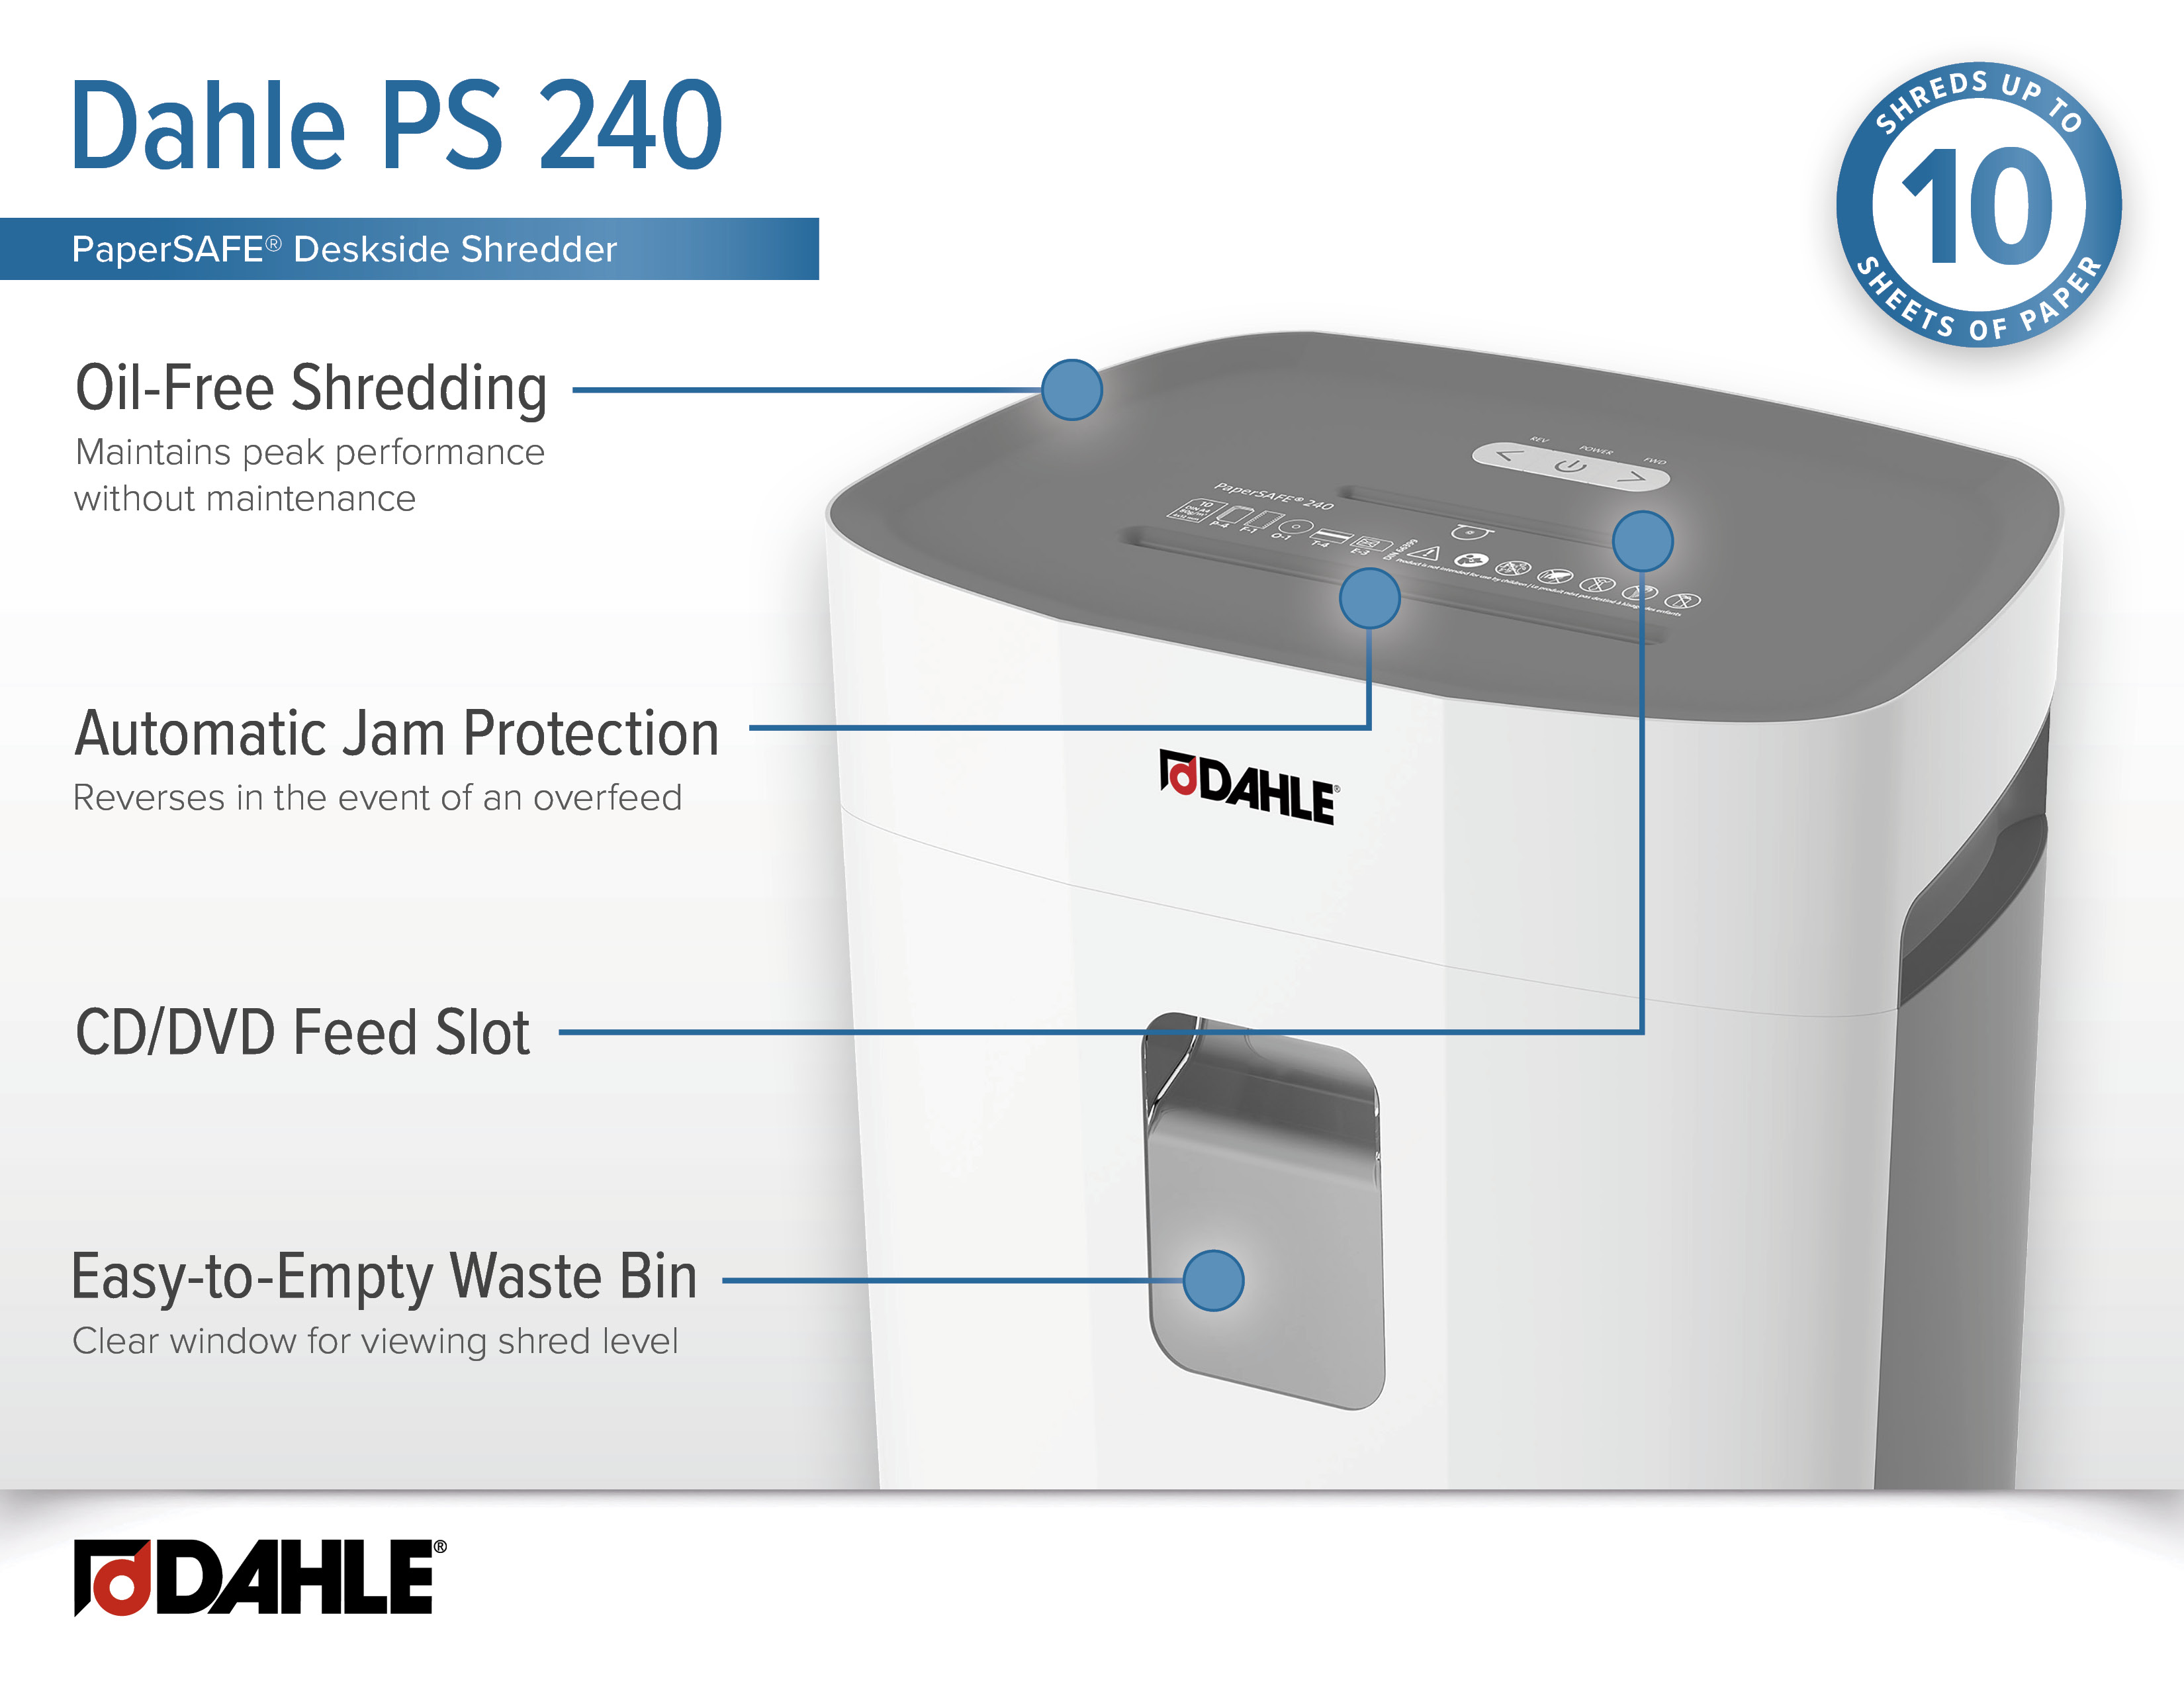 Dahle PaperSAFE 240 Infographic